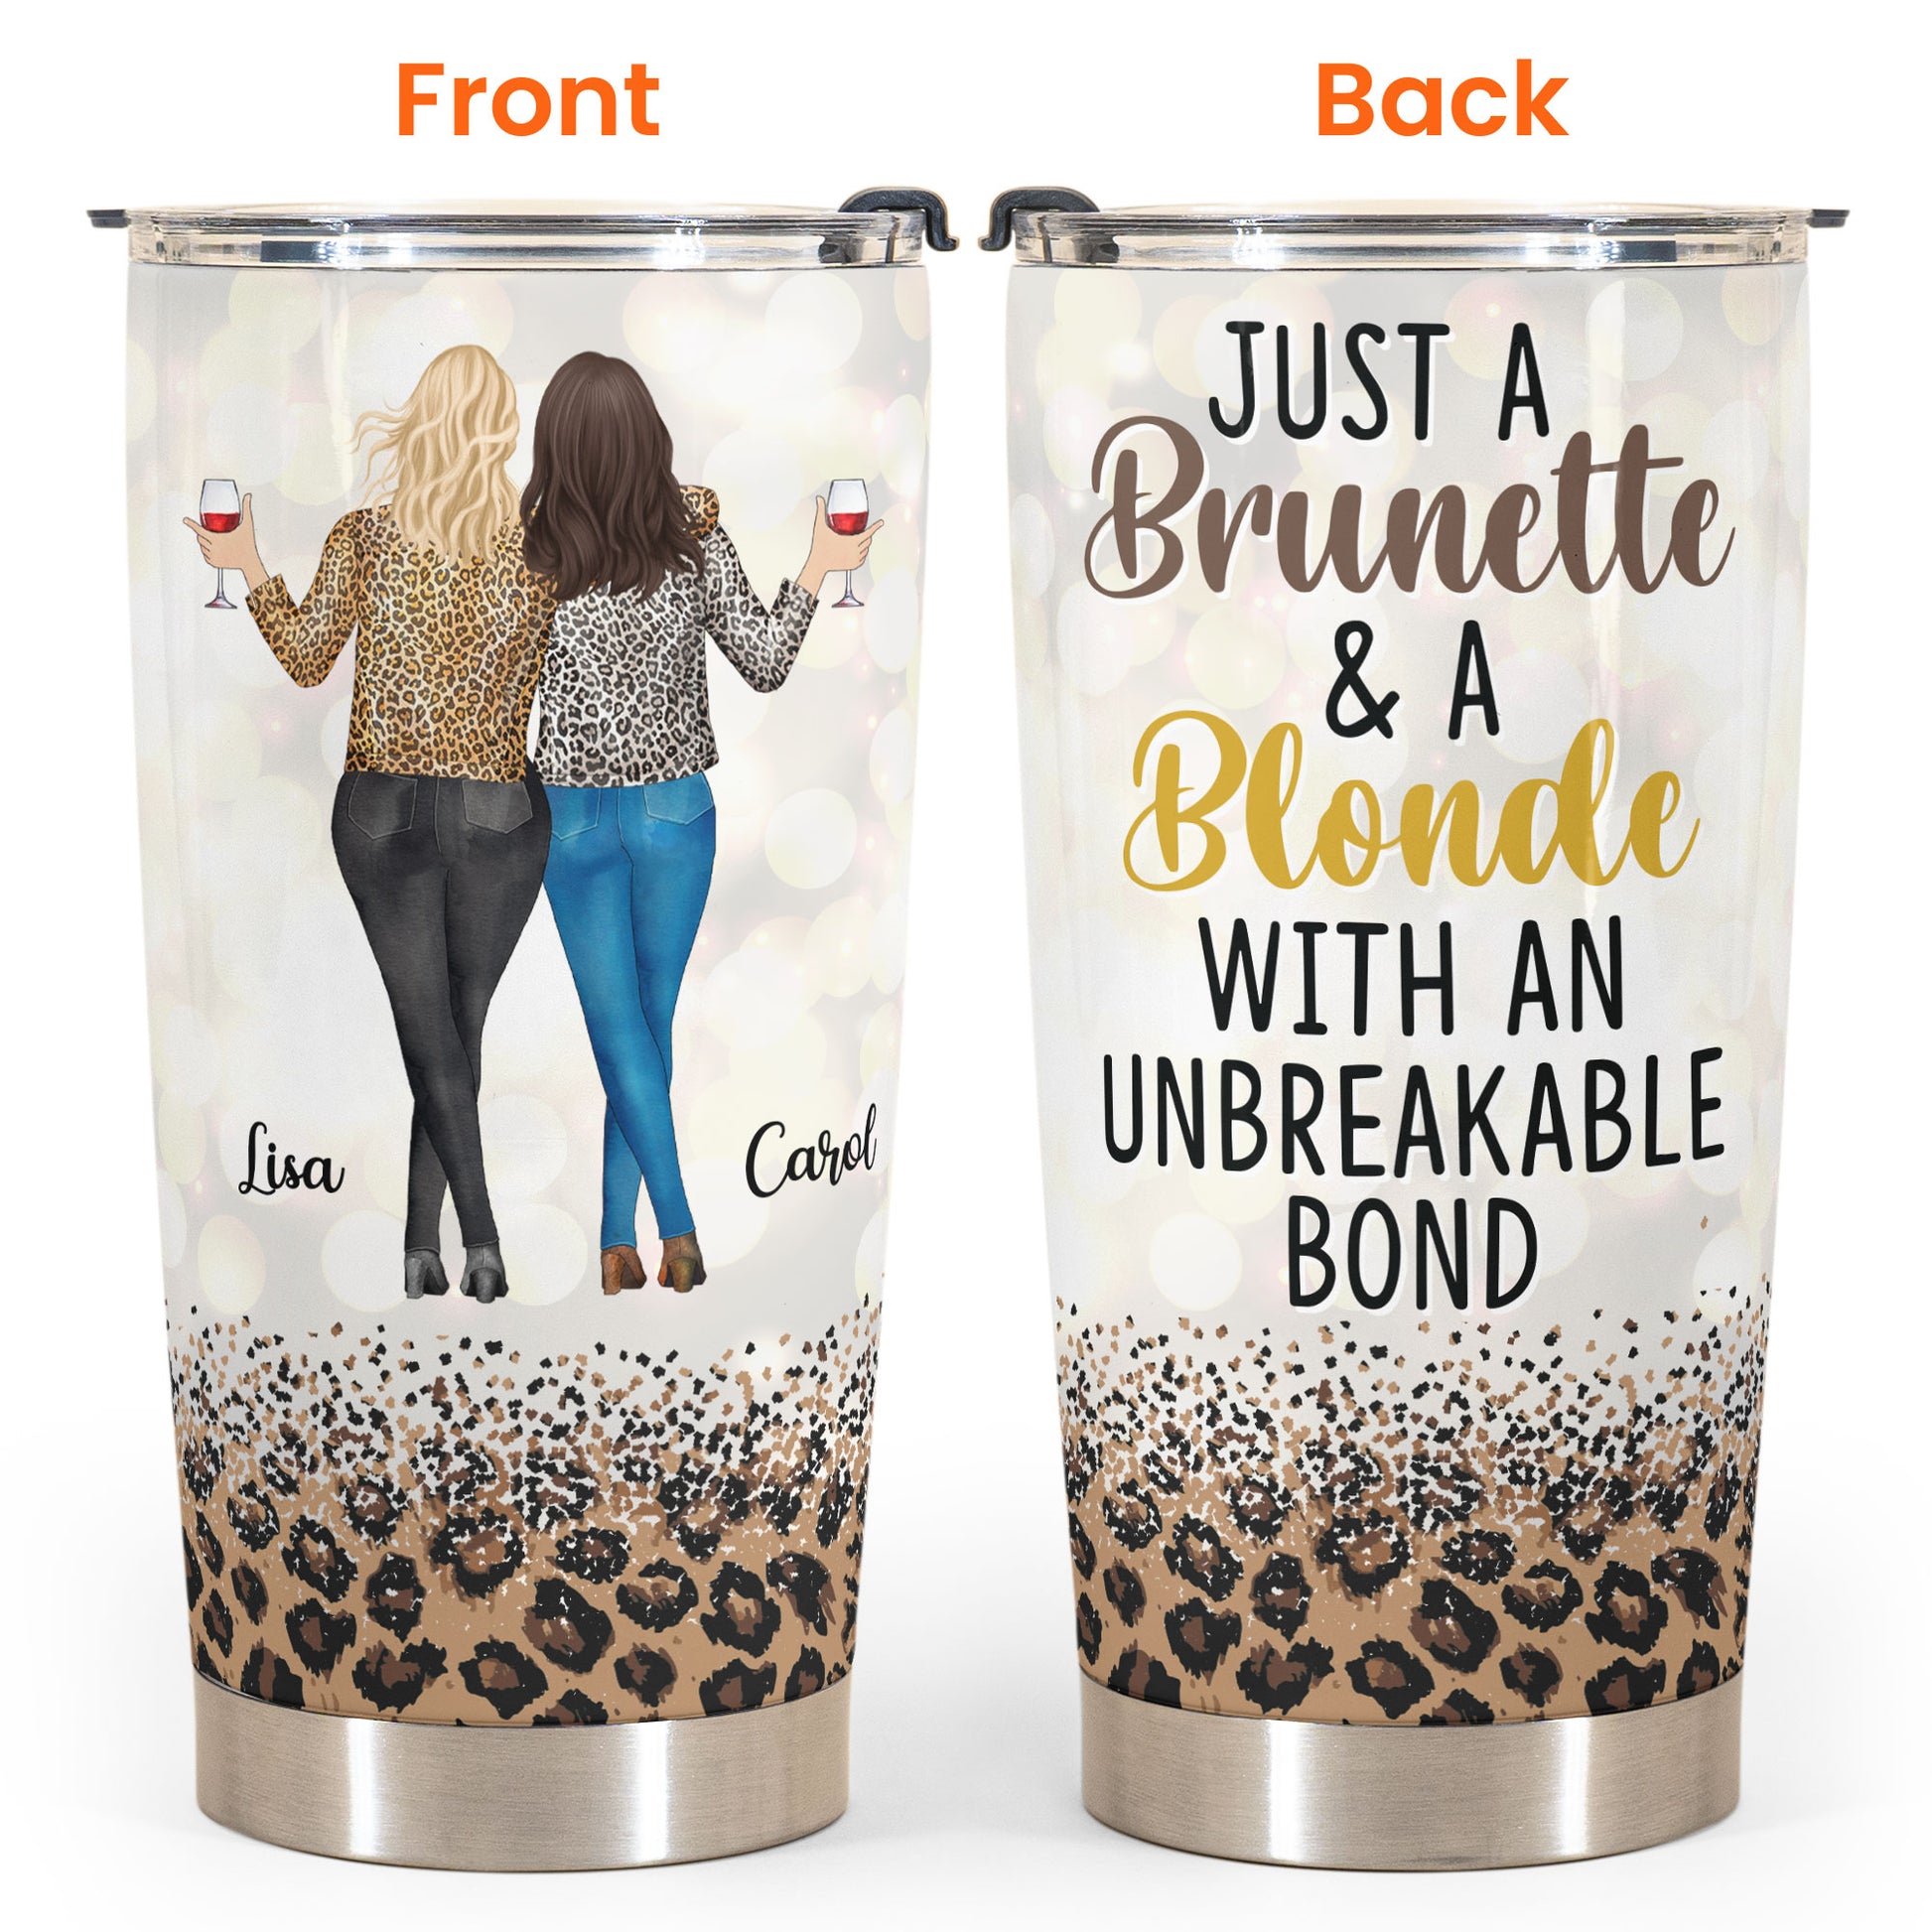 Just A Brunette & A Blonde With An Unbreakable Bond - Personalized Tumbler Cup - Birthday Gift For Besties, BFF, Sisters, Sistas, Co-workers - Leopard Pattern Jacket Woman